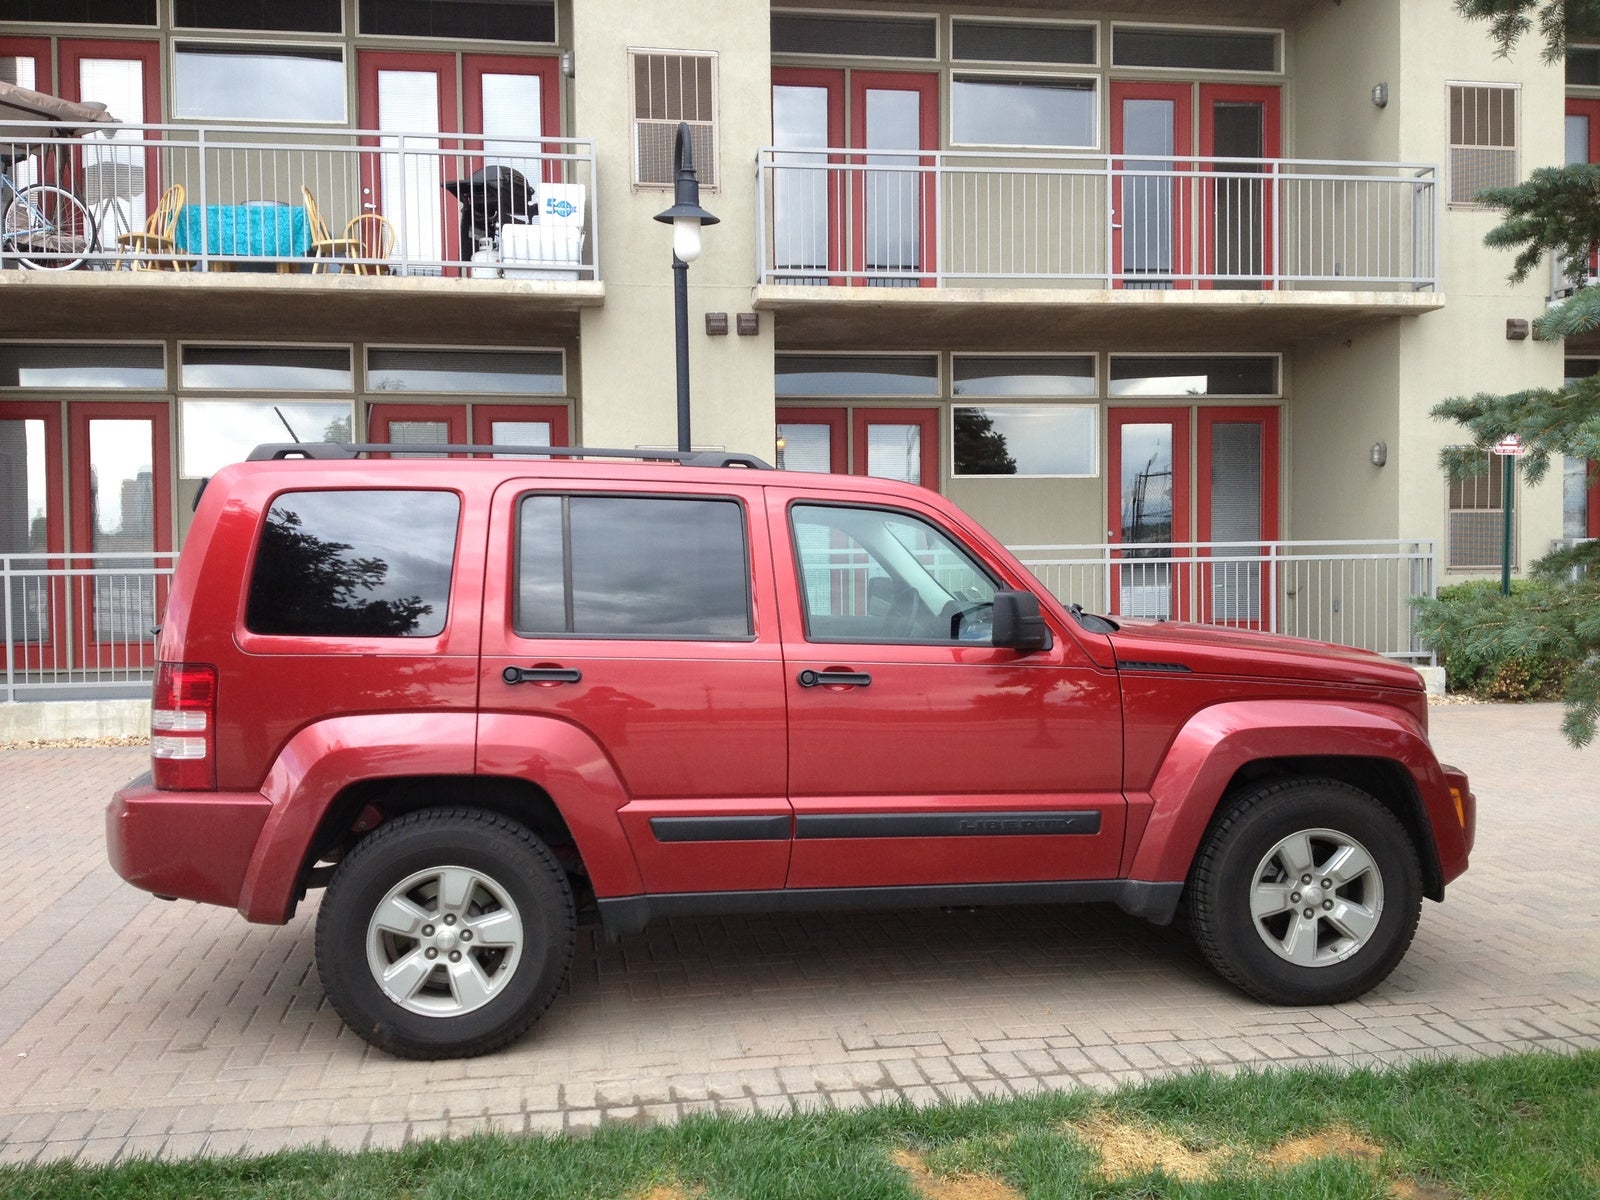 2009 Jeep Liberty - Pictures - CarGurus